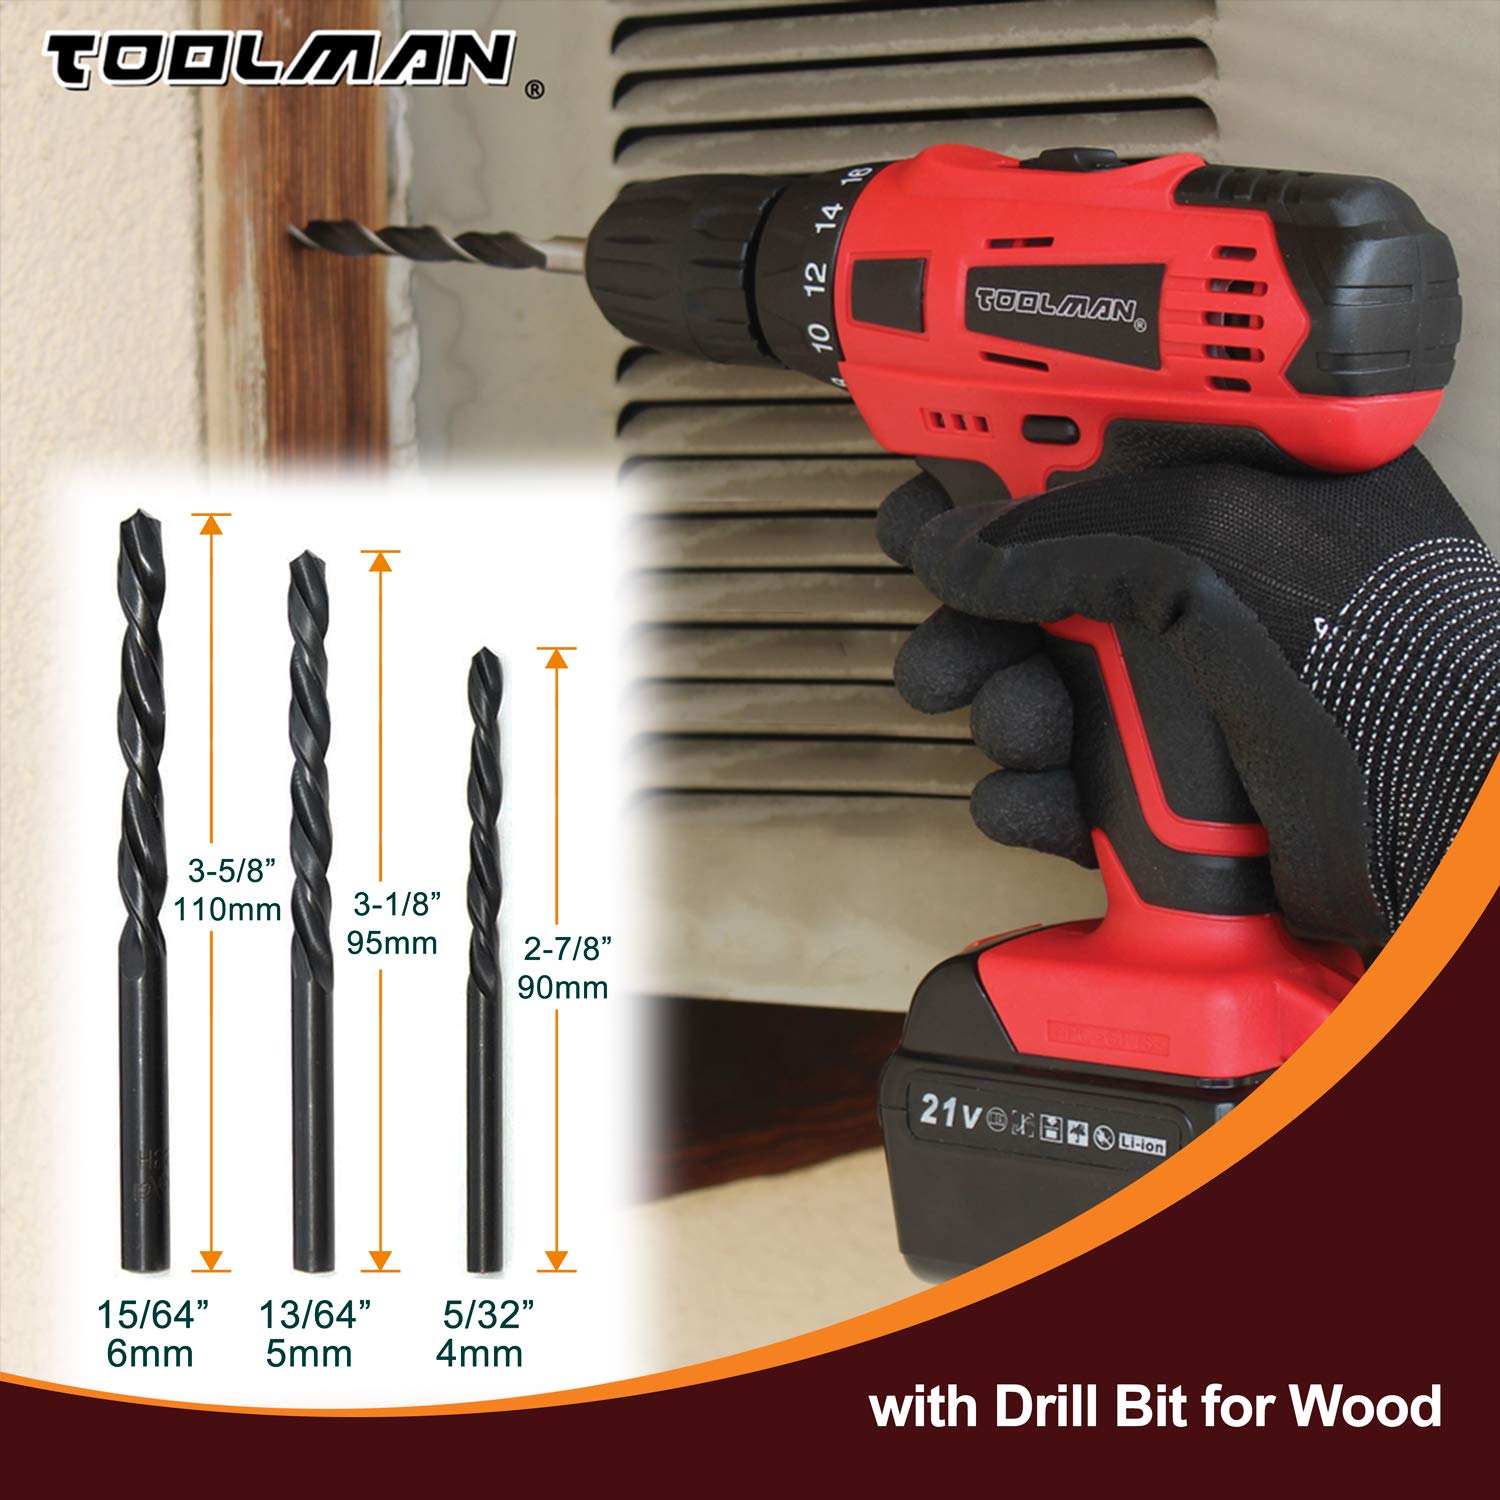 Toolman 21v Cordless Lithium Drill with 1pc Battery, drills sets and 1pc 2hour quick charger ZTP008